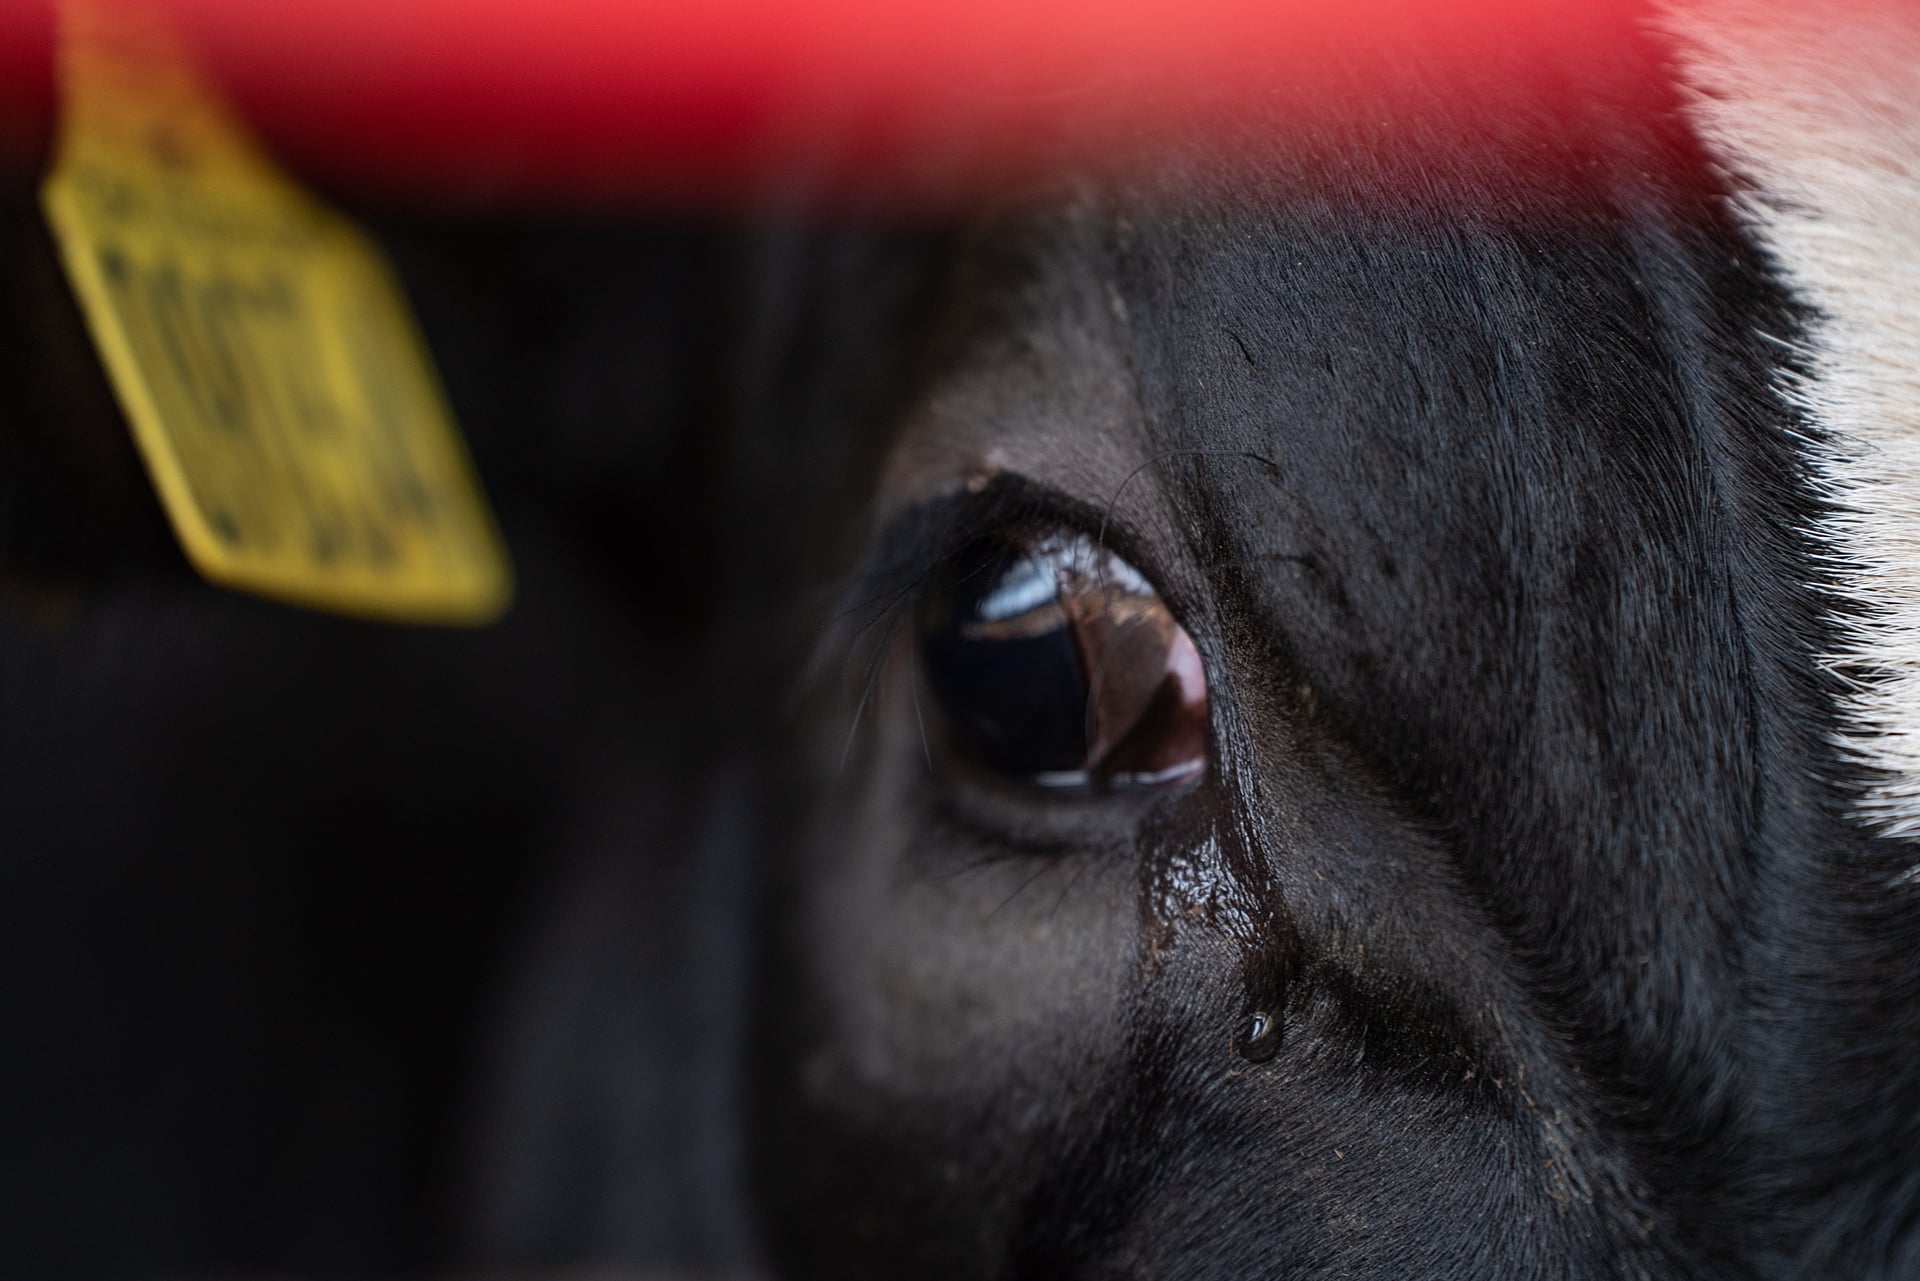 Fluid weeps from a dairy cow's eyes who stands inside a transport trailer parked at a border crossing rest facility.